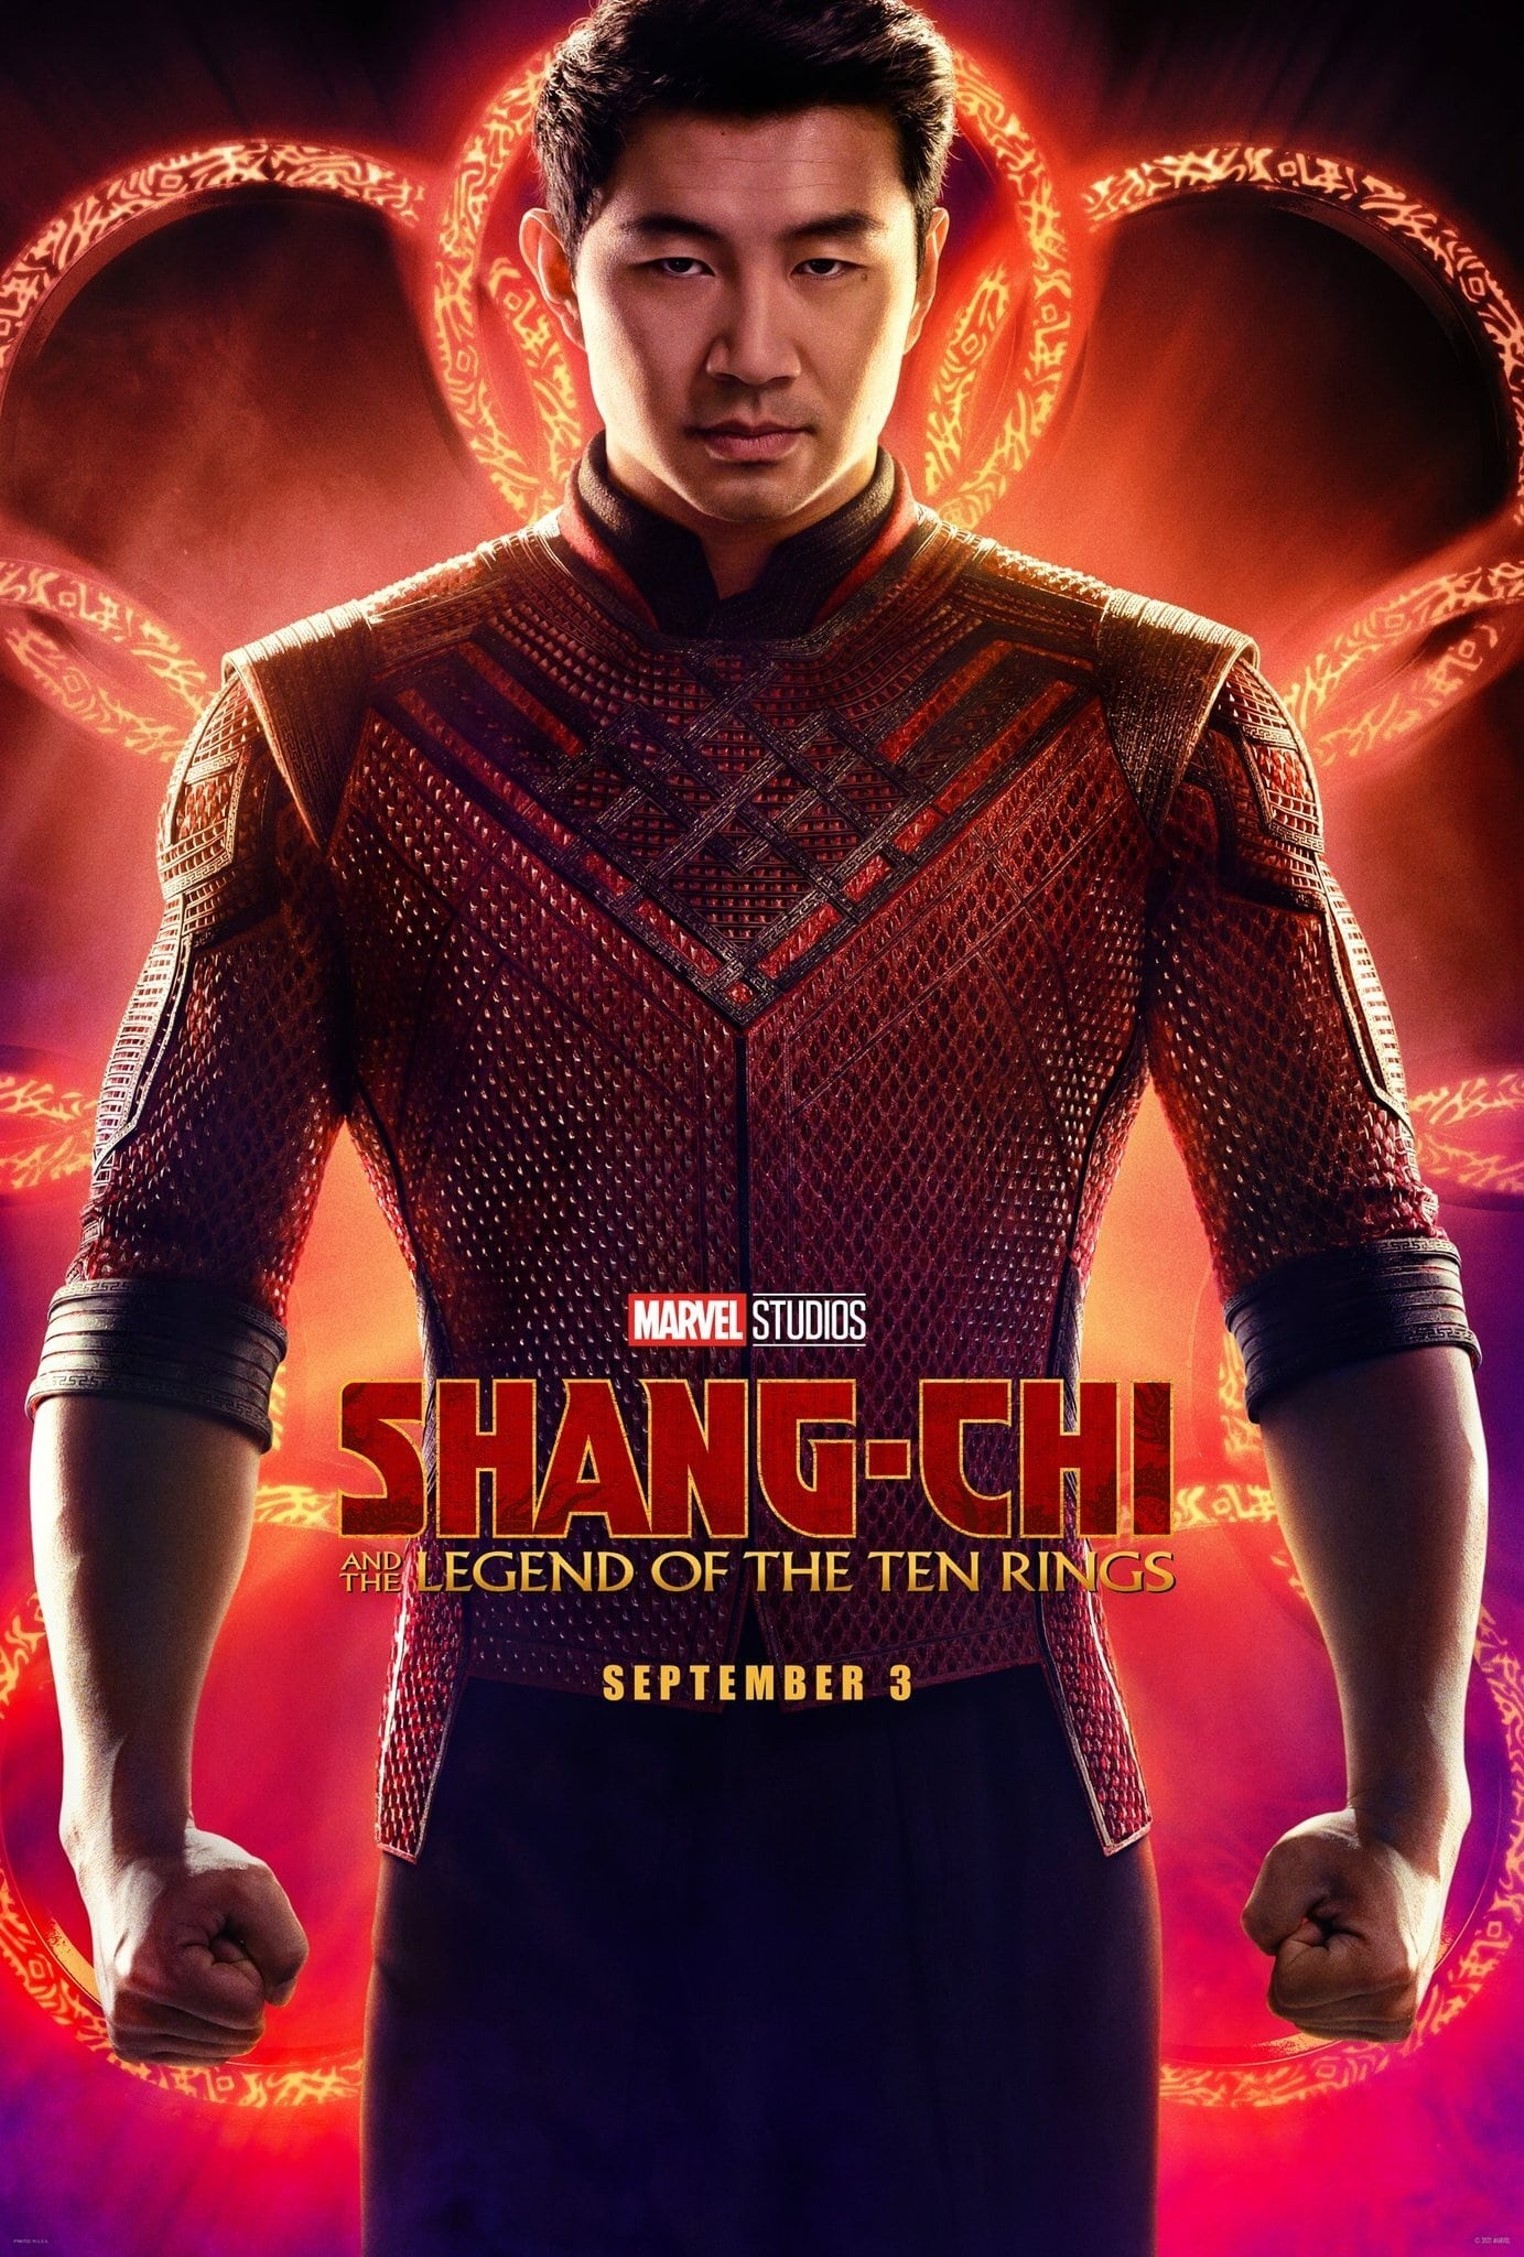 ShangChi and the Legend of the Ten Rings Phoenix New Times The